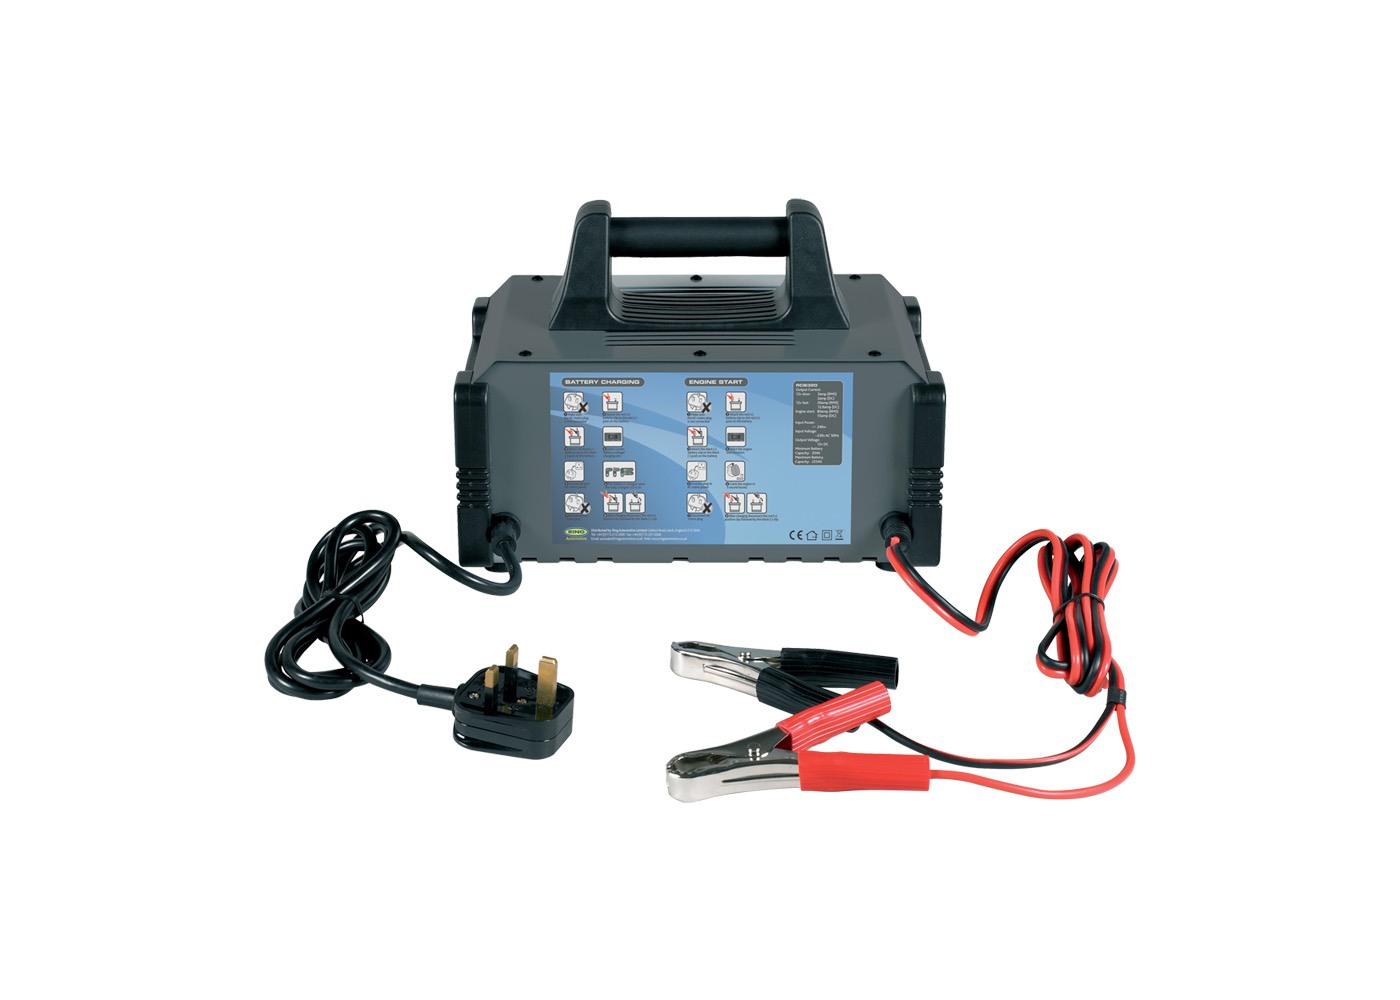 Workshop Battery Charger, 20A Jump Starter and Battery Charger, RCB320/RECB320